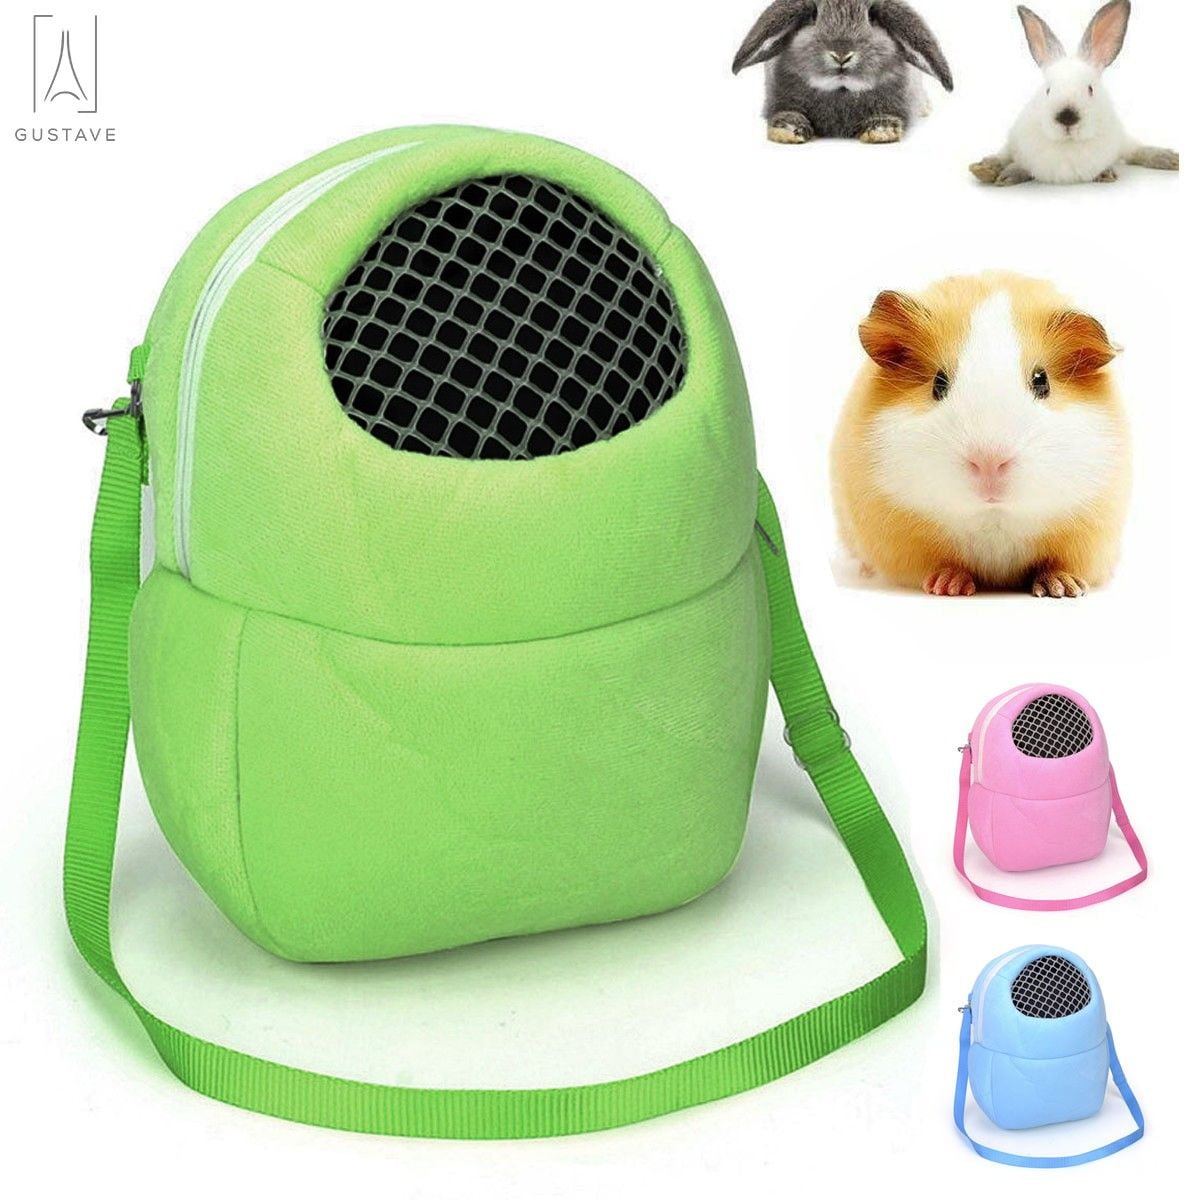 Portable Hamster Carrier Bag Flannelette Breathable Pet Carrier Outgoing Bag for Small Animals Hedgehogs S Sugar Gliders Guinea Pigs Squirrels Coffee 